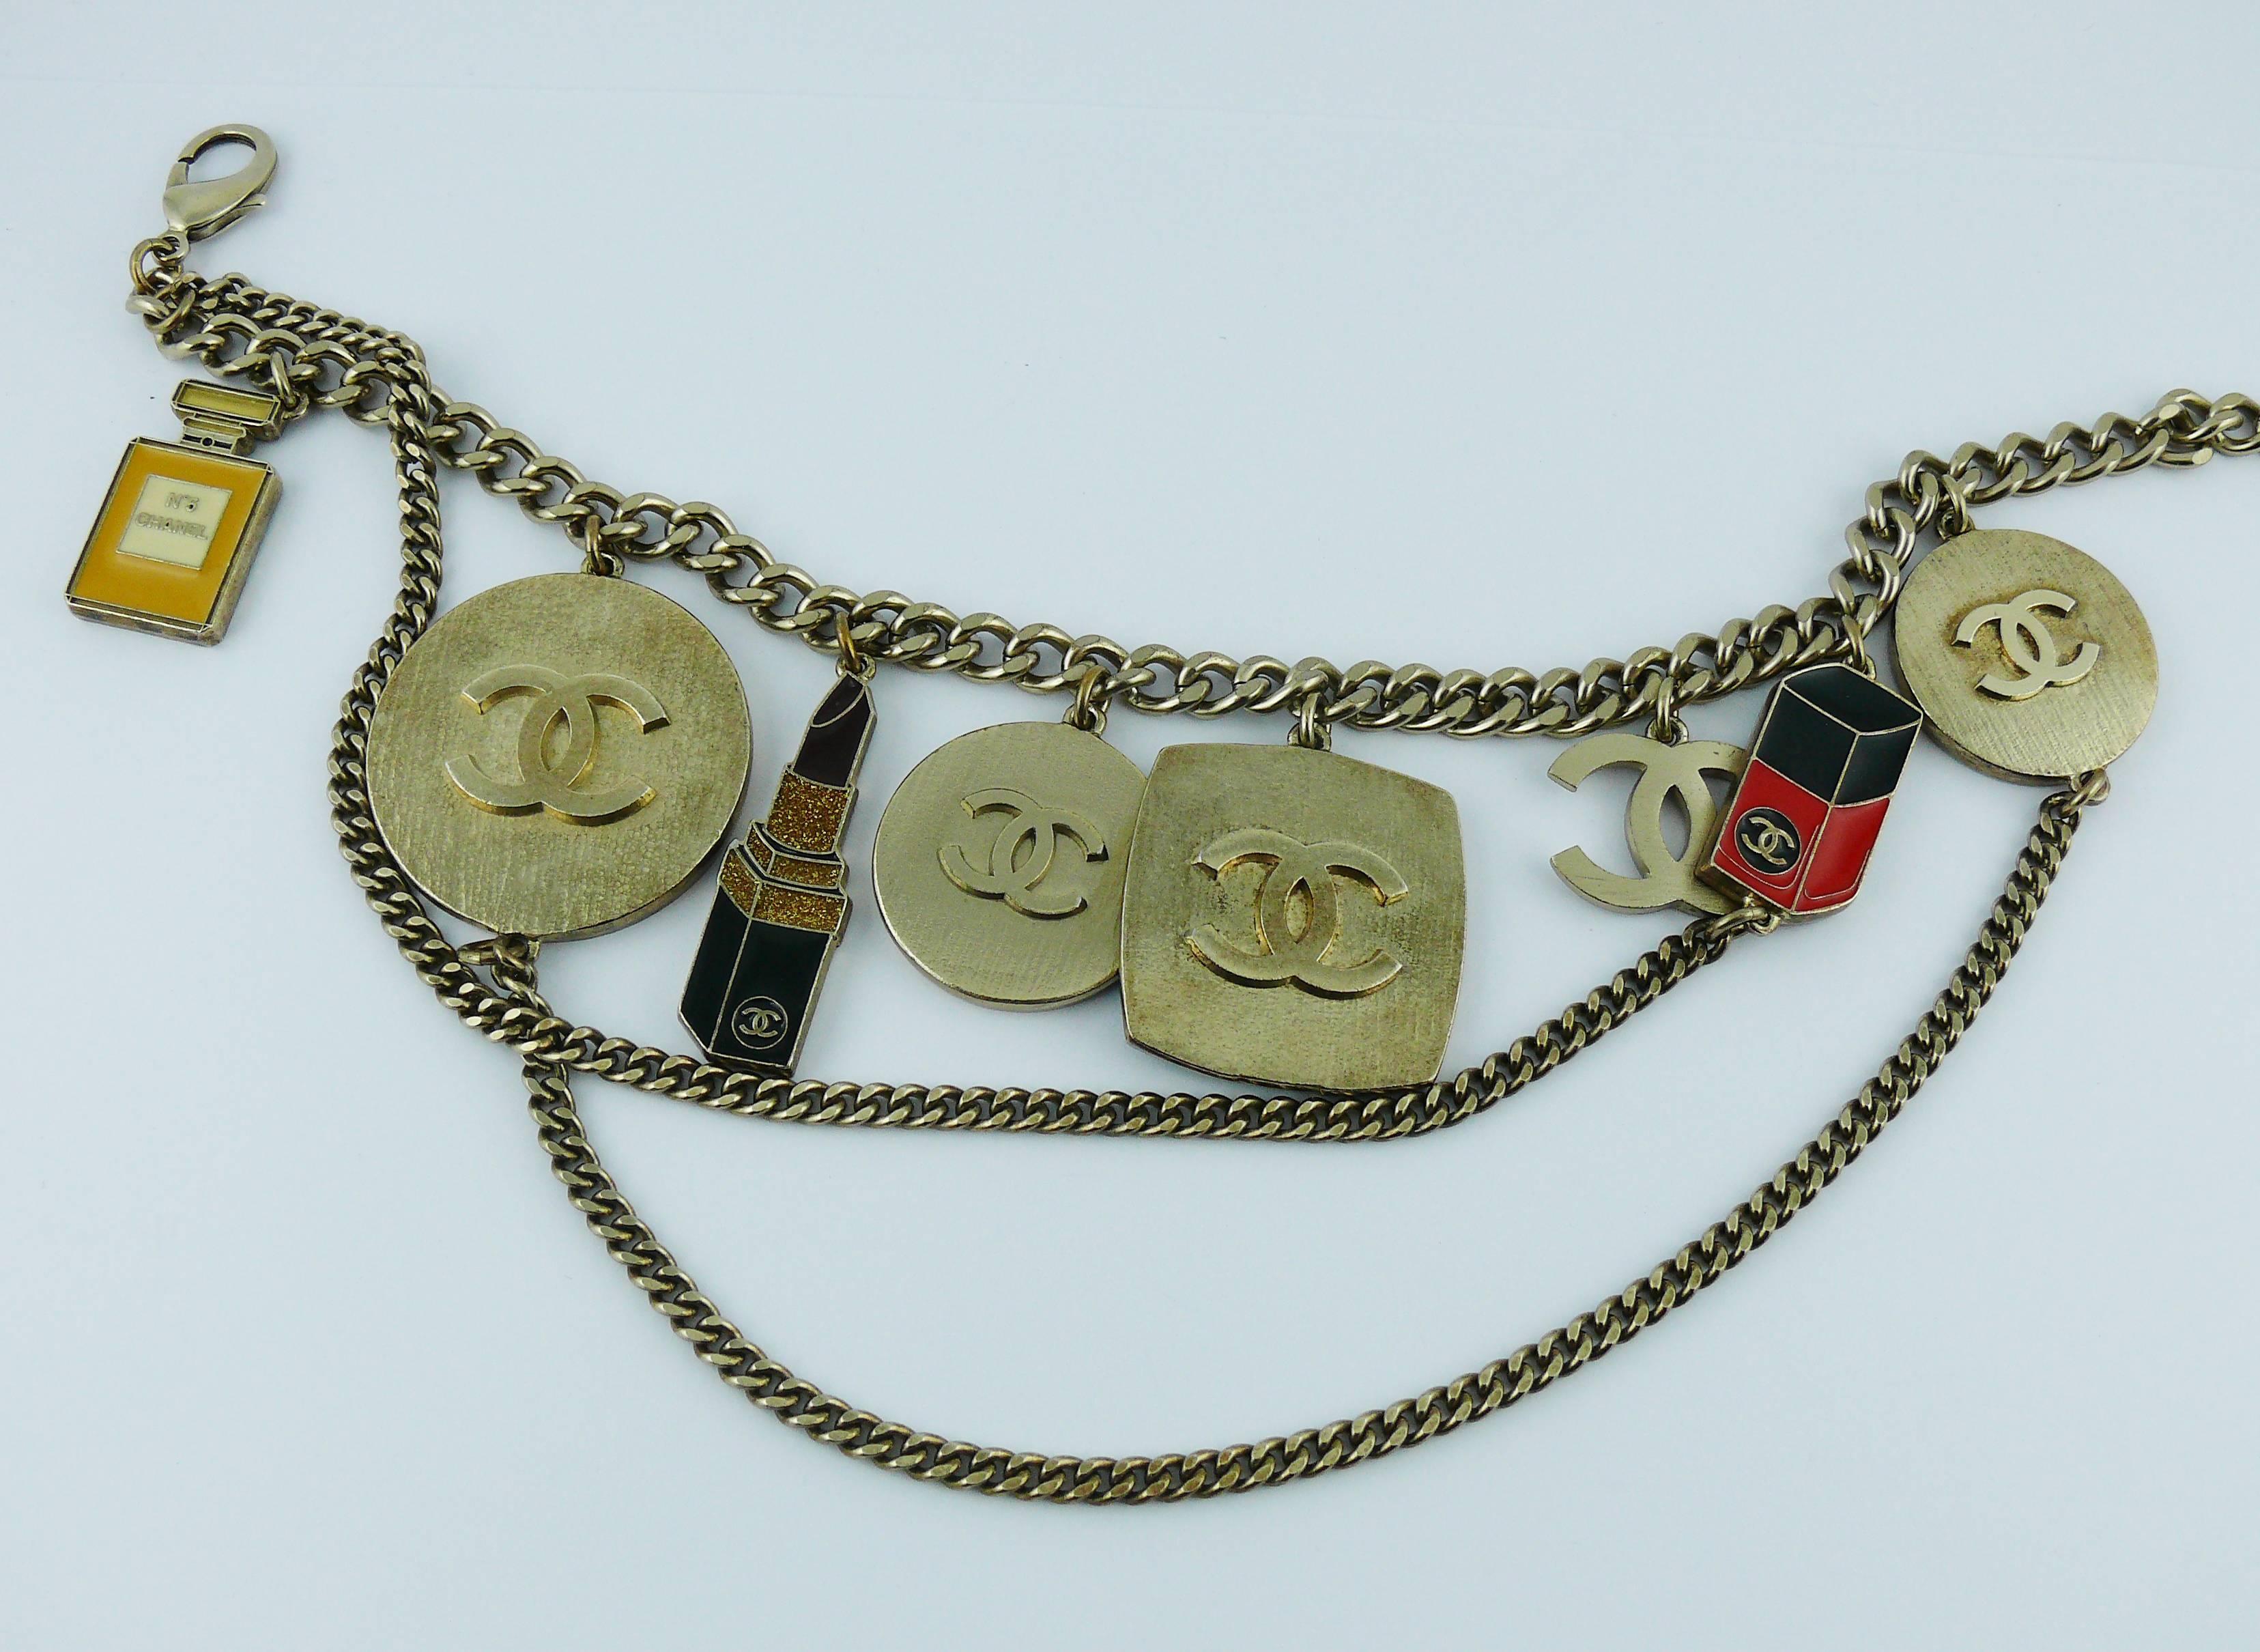 Women's Chanel Rare Fall 2004 Make-Up Charm Runway Belt Necklace